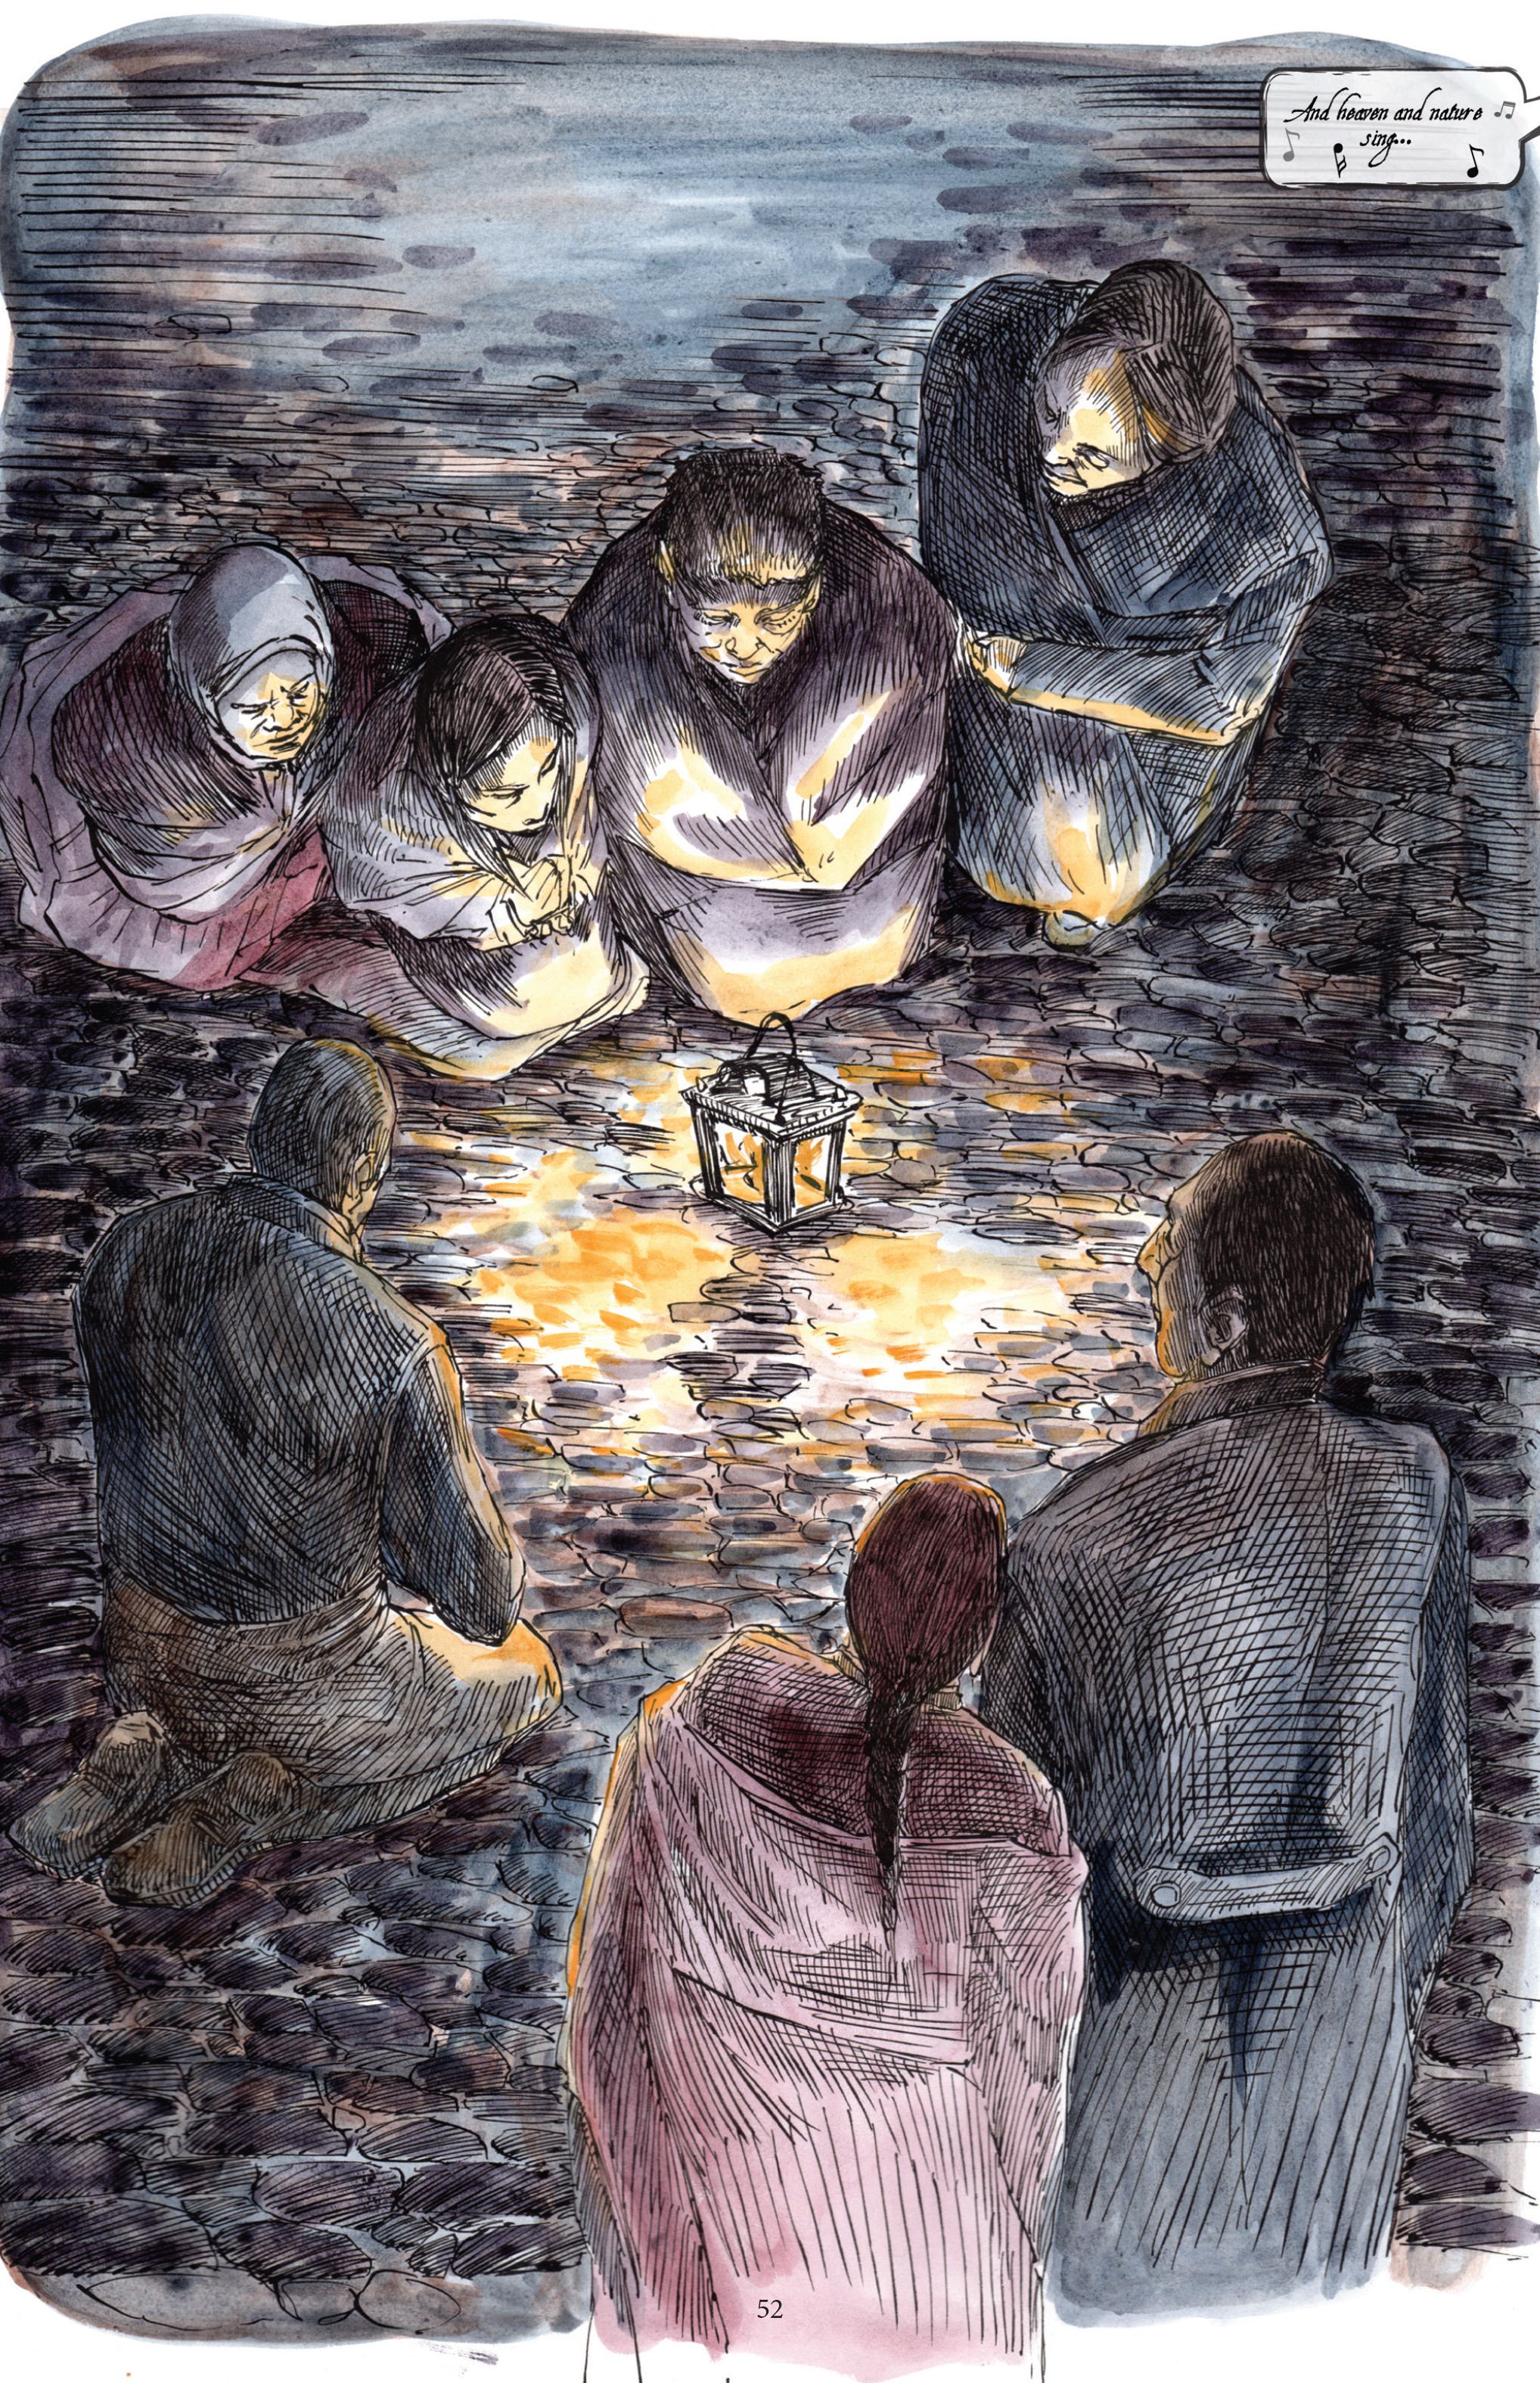 Splash page.  They all gather to pray as the singing continues.  FROM OFF (SINGING), 